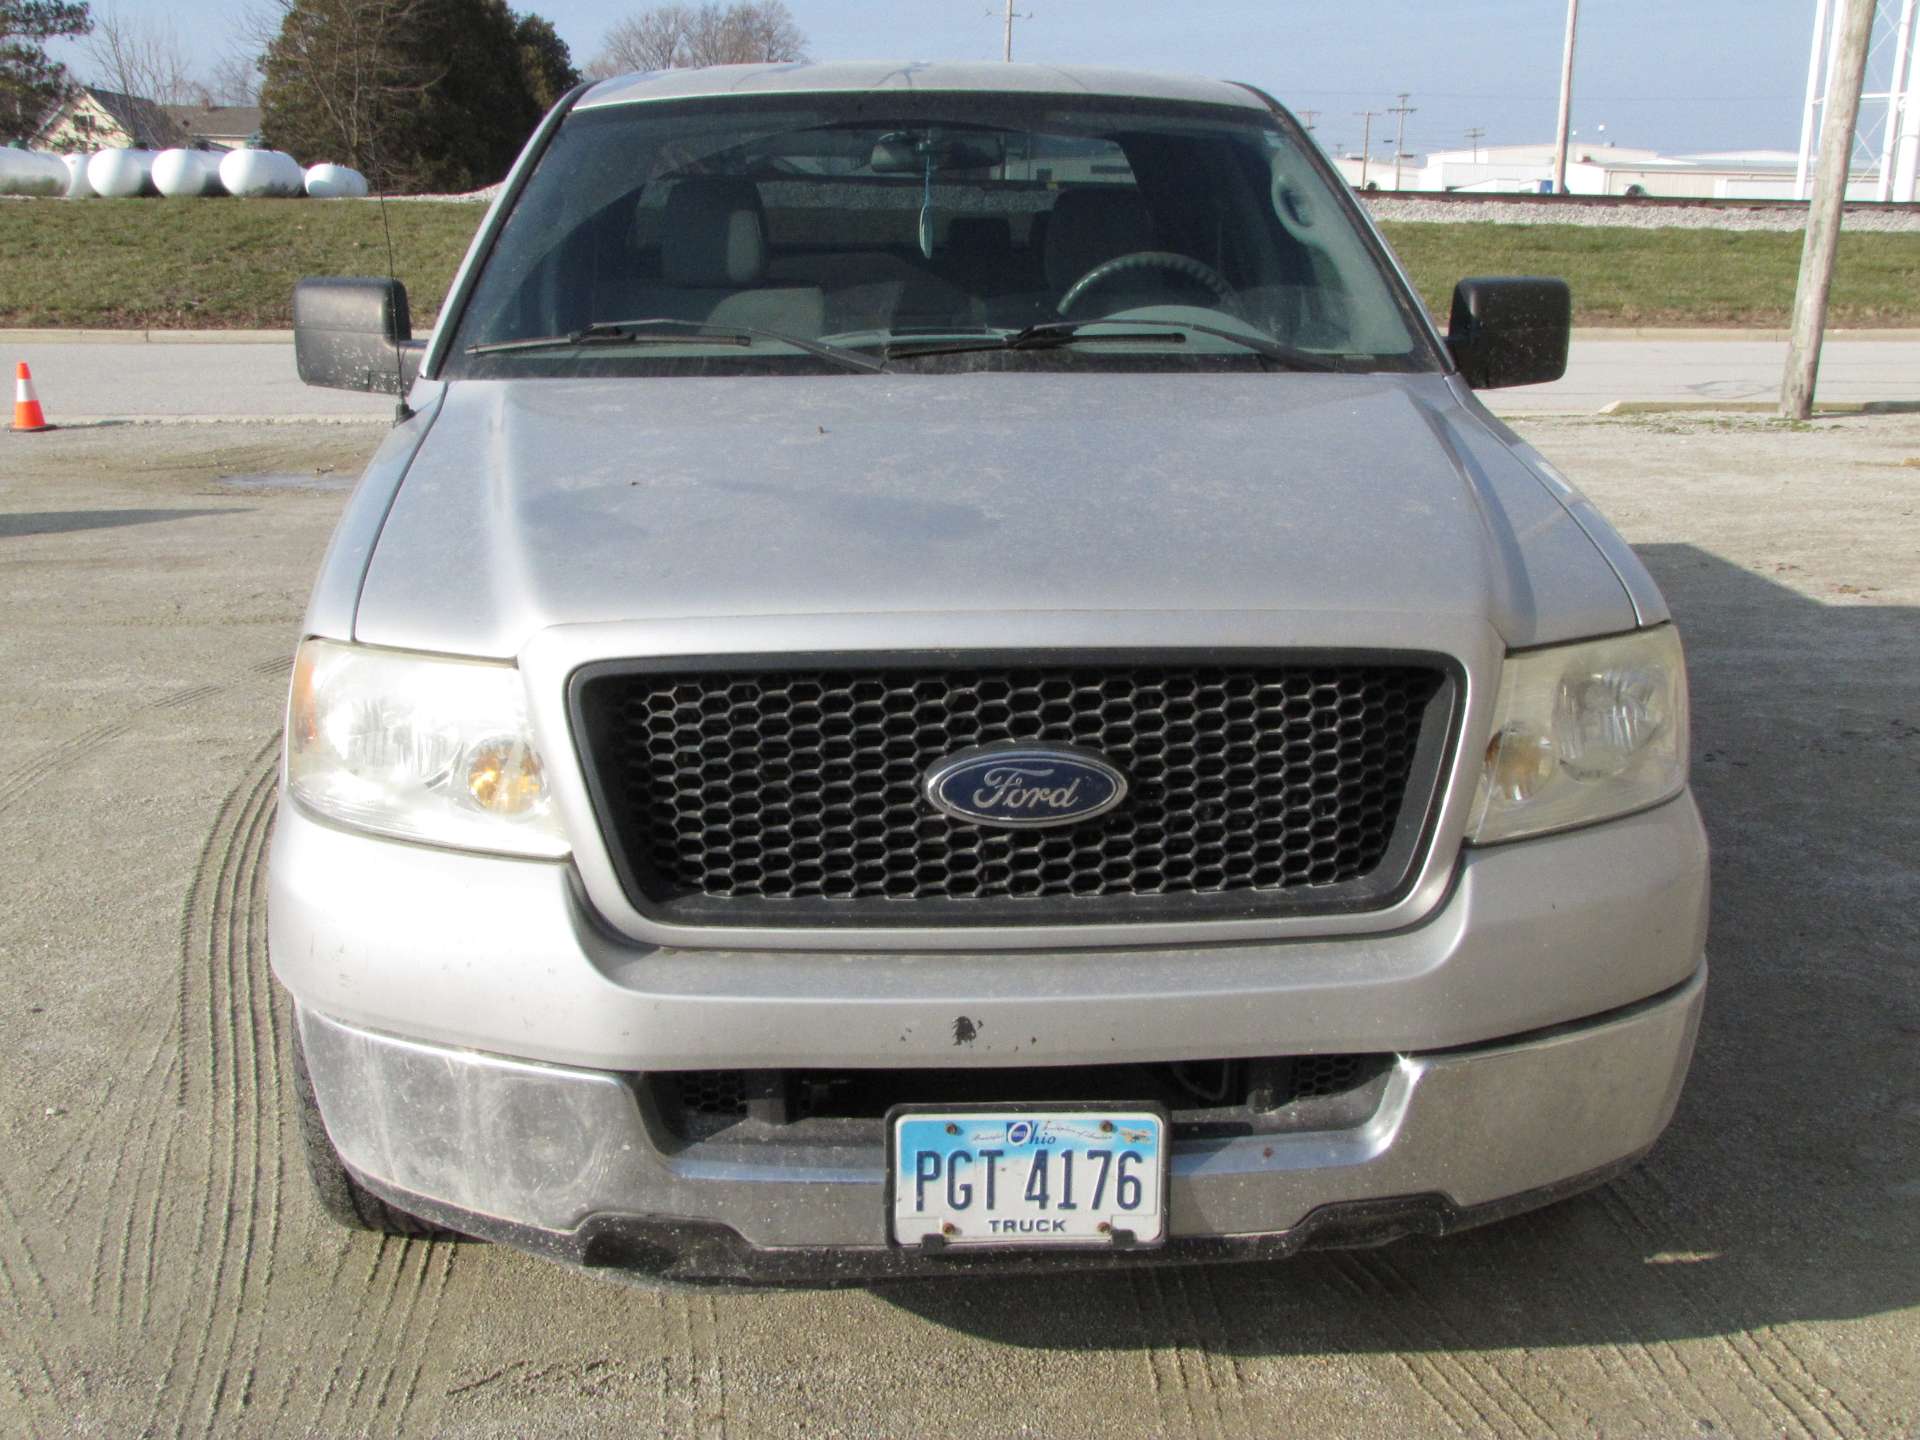 2005 Ford F-150 XLT pickup truck - Image 27 of 89